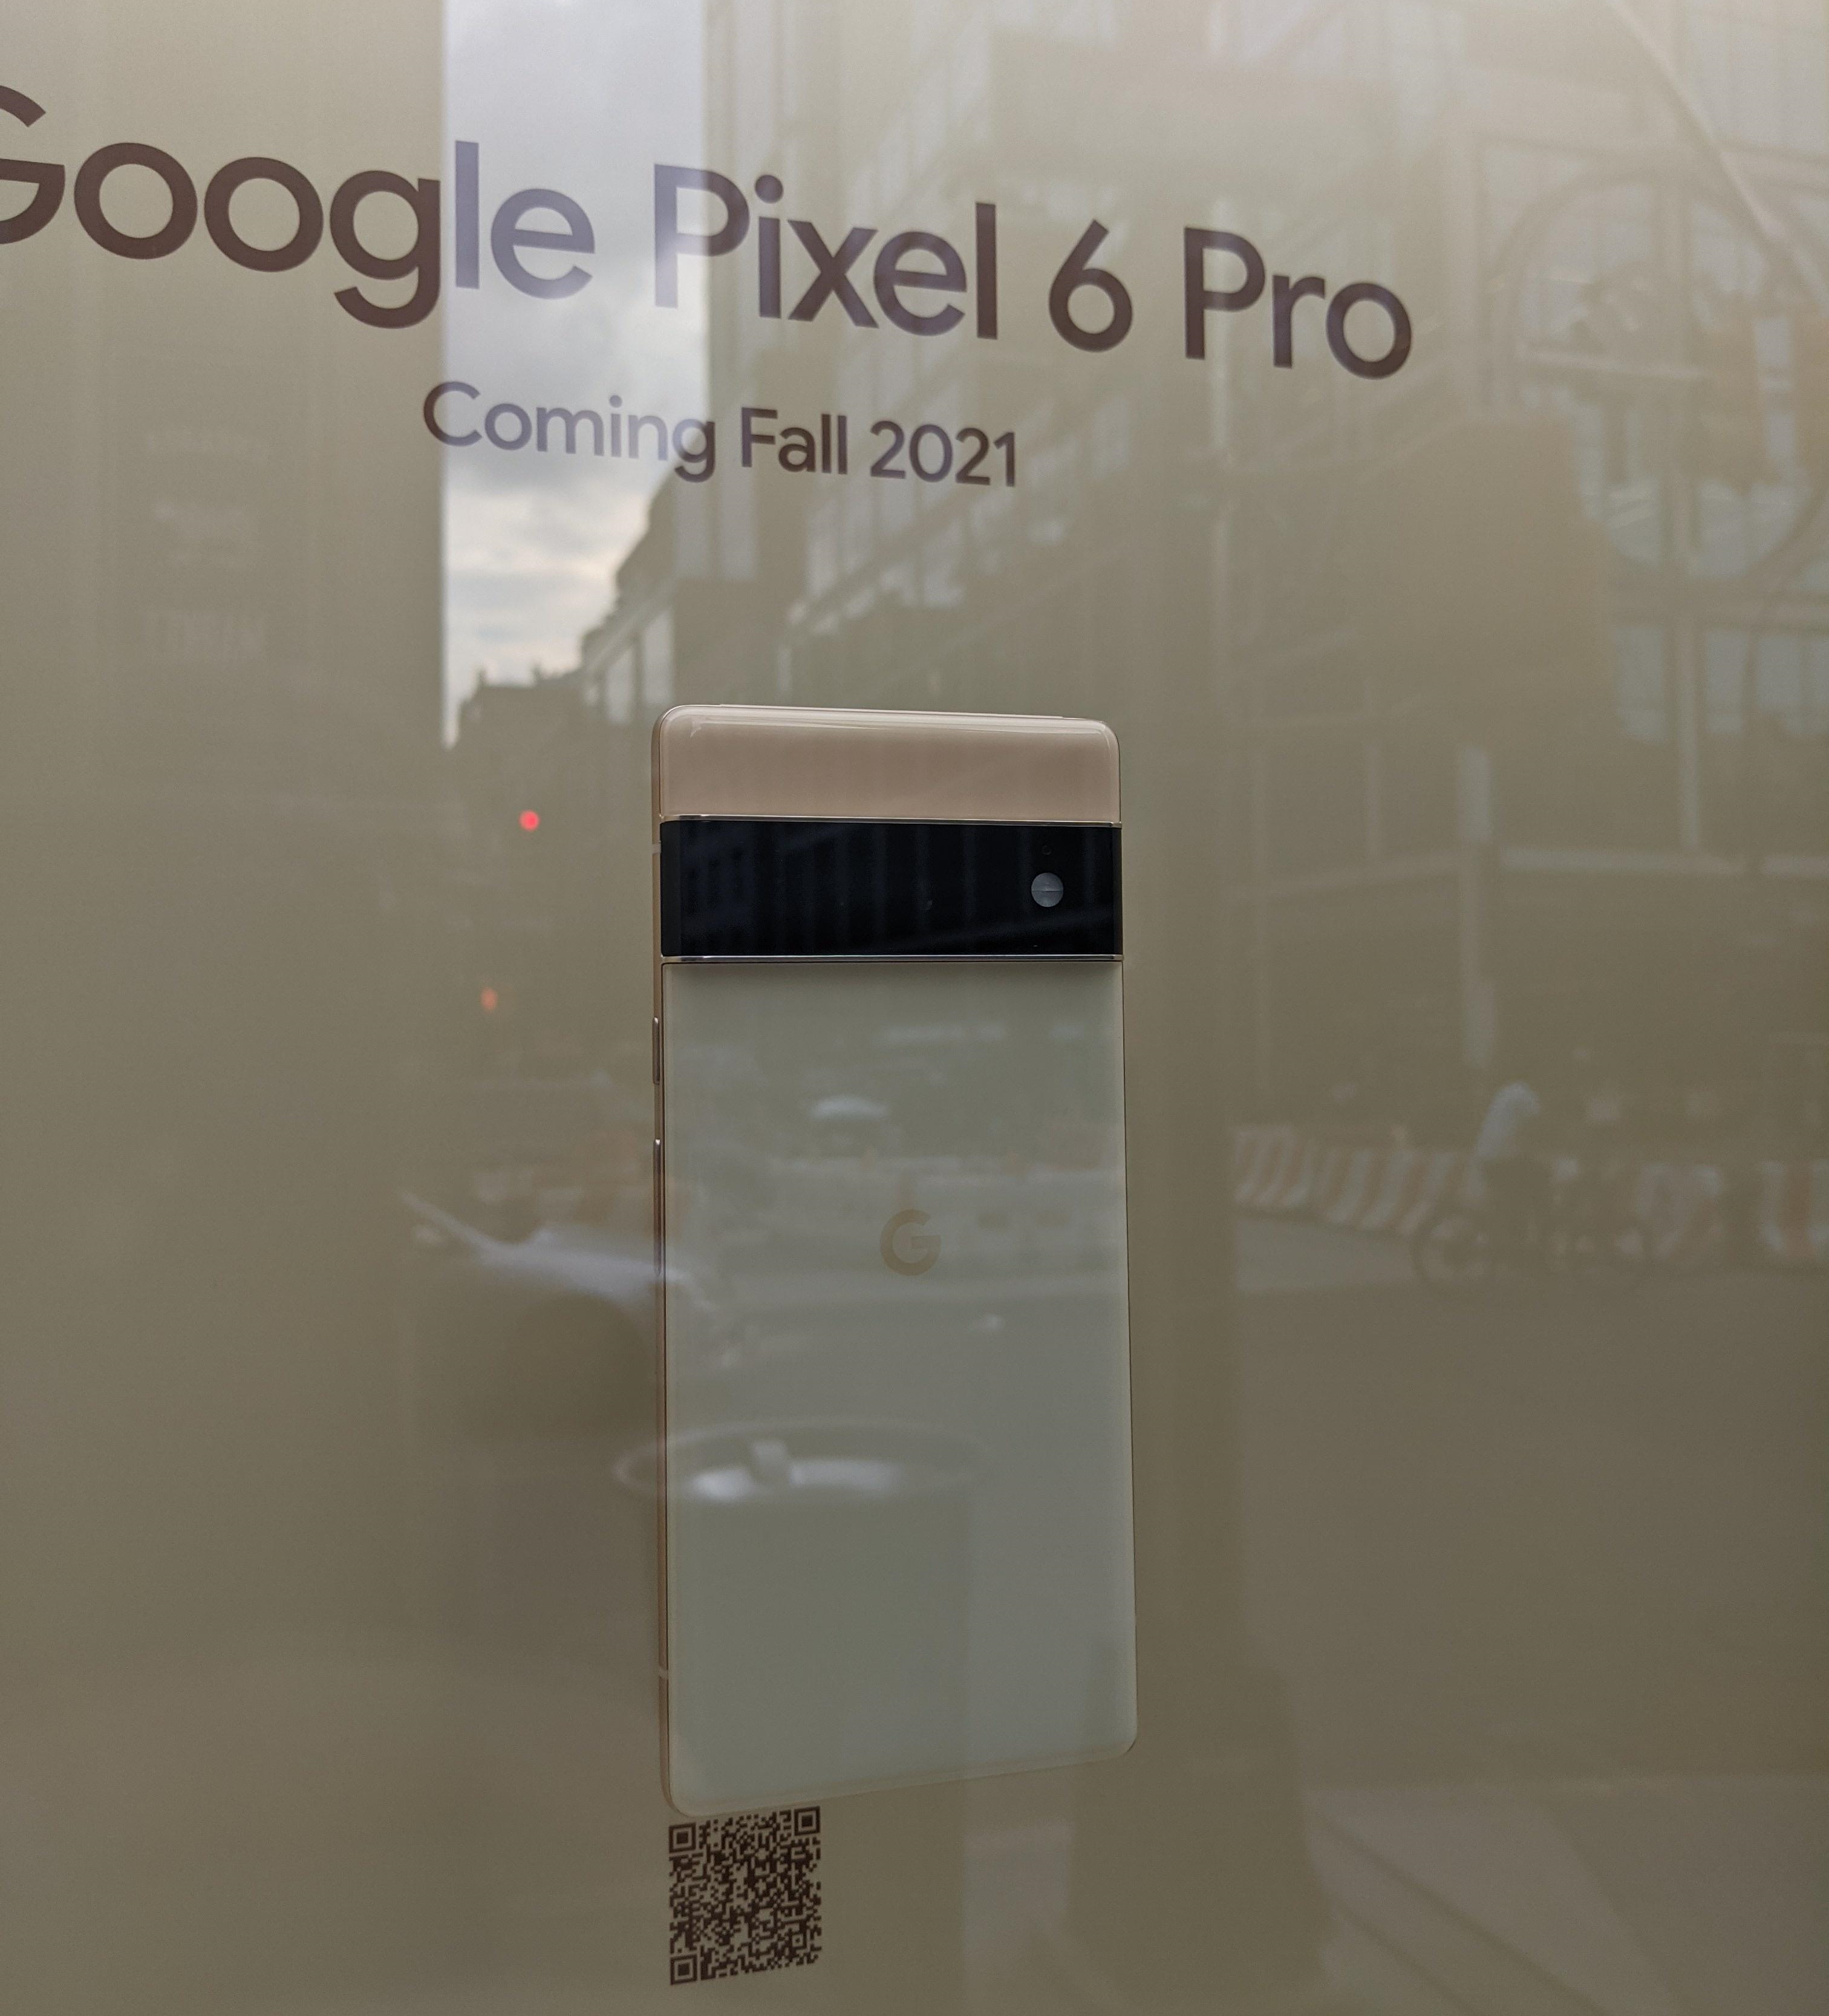 Google Pixel 6 Pro fails to shine against the Snapdragon 888 in early benchmark results as Google ramps up its teaser campaign